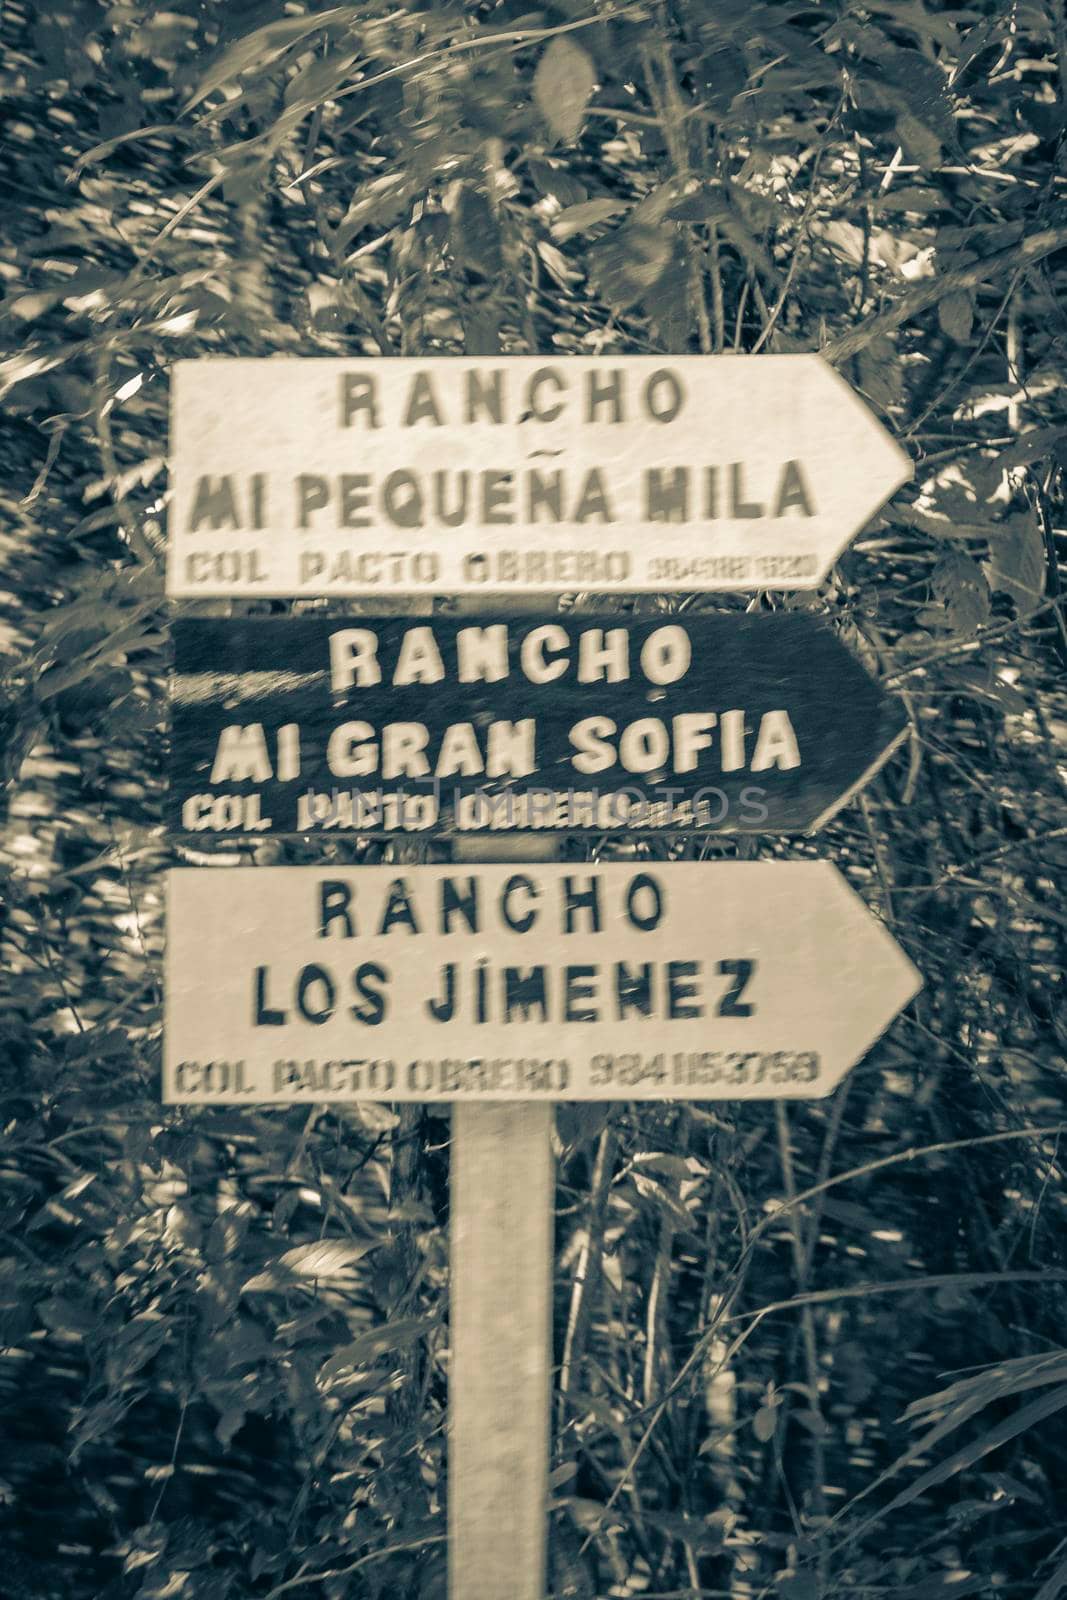 Ranches and farms information arrows welcome sing board Mexico. by Arkadij